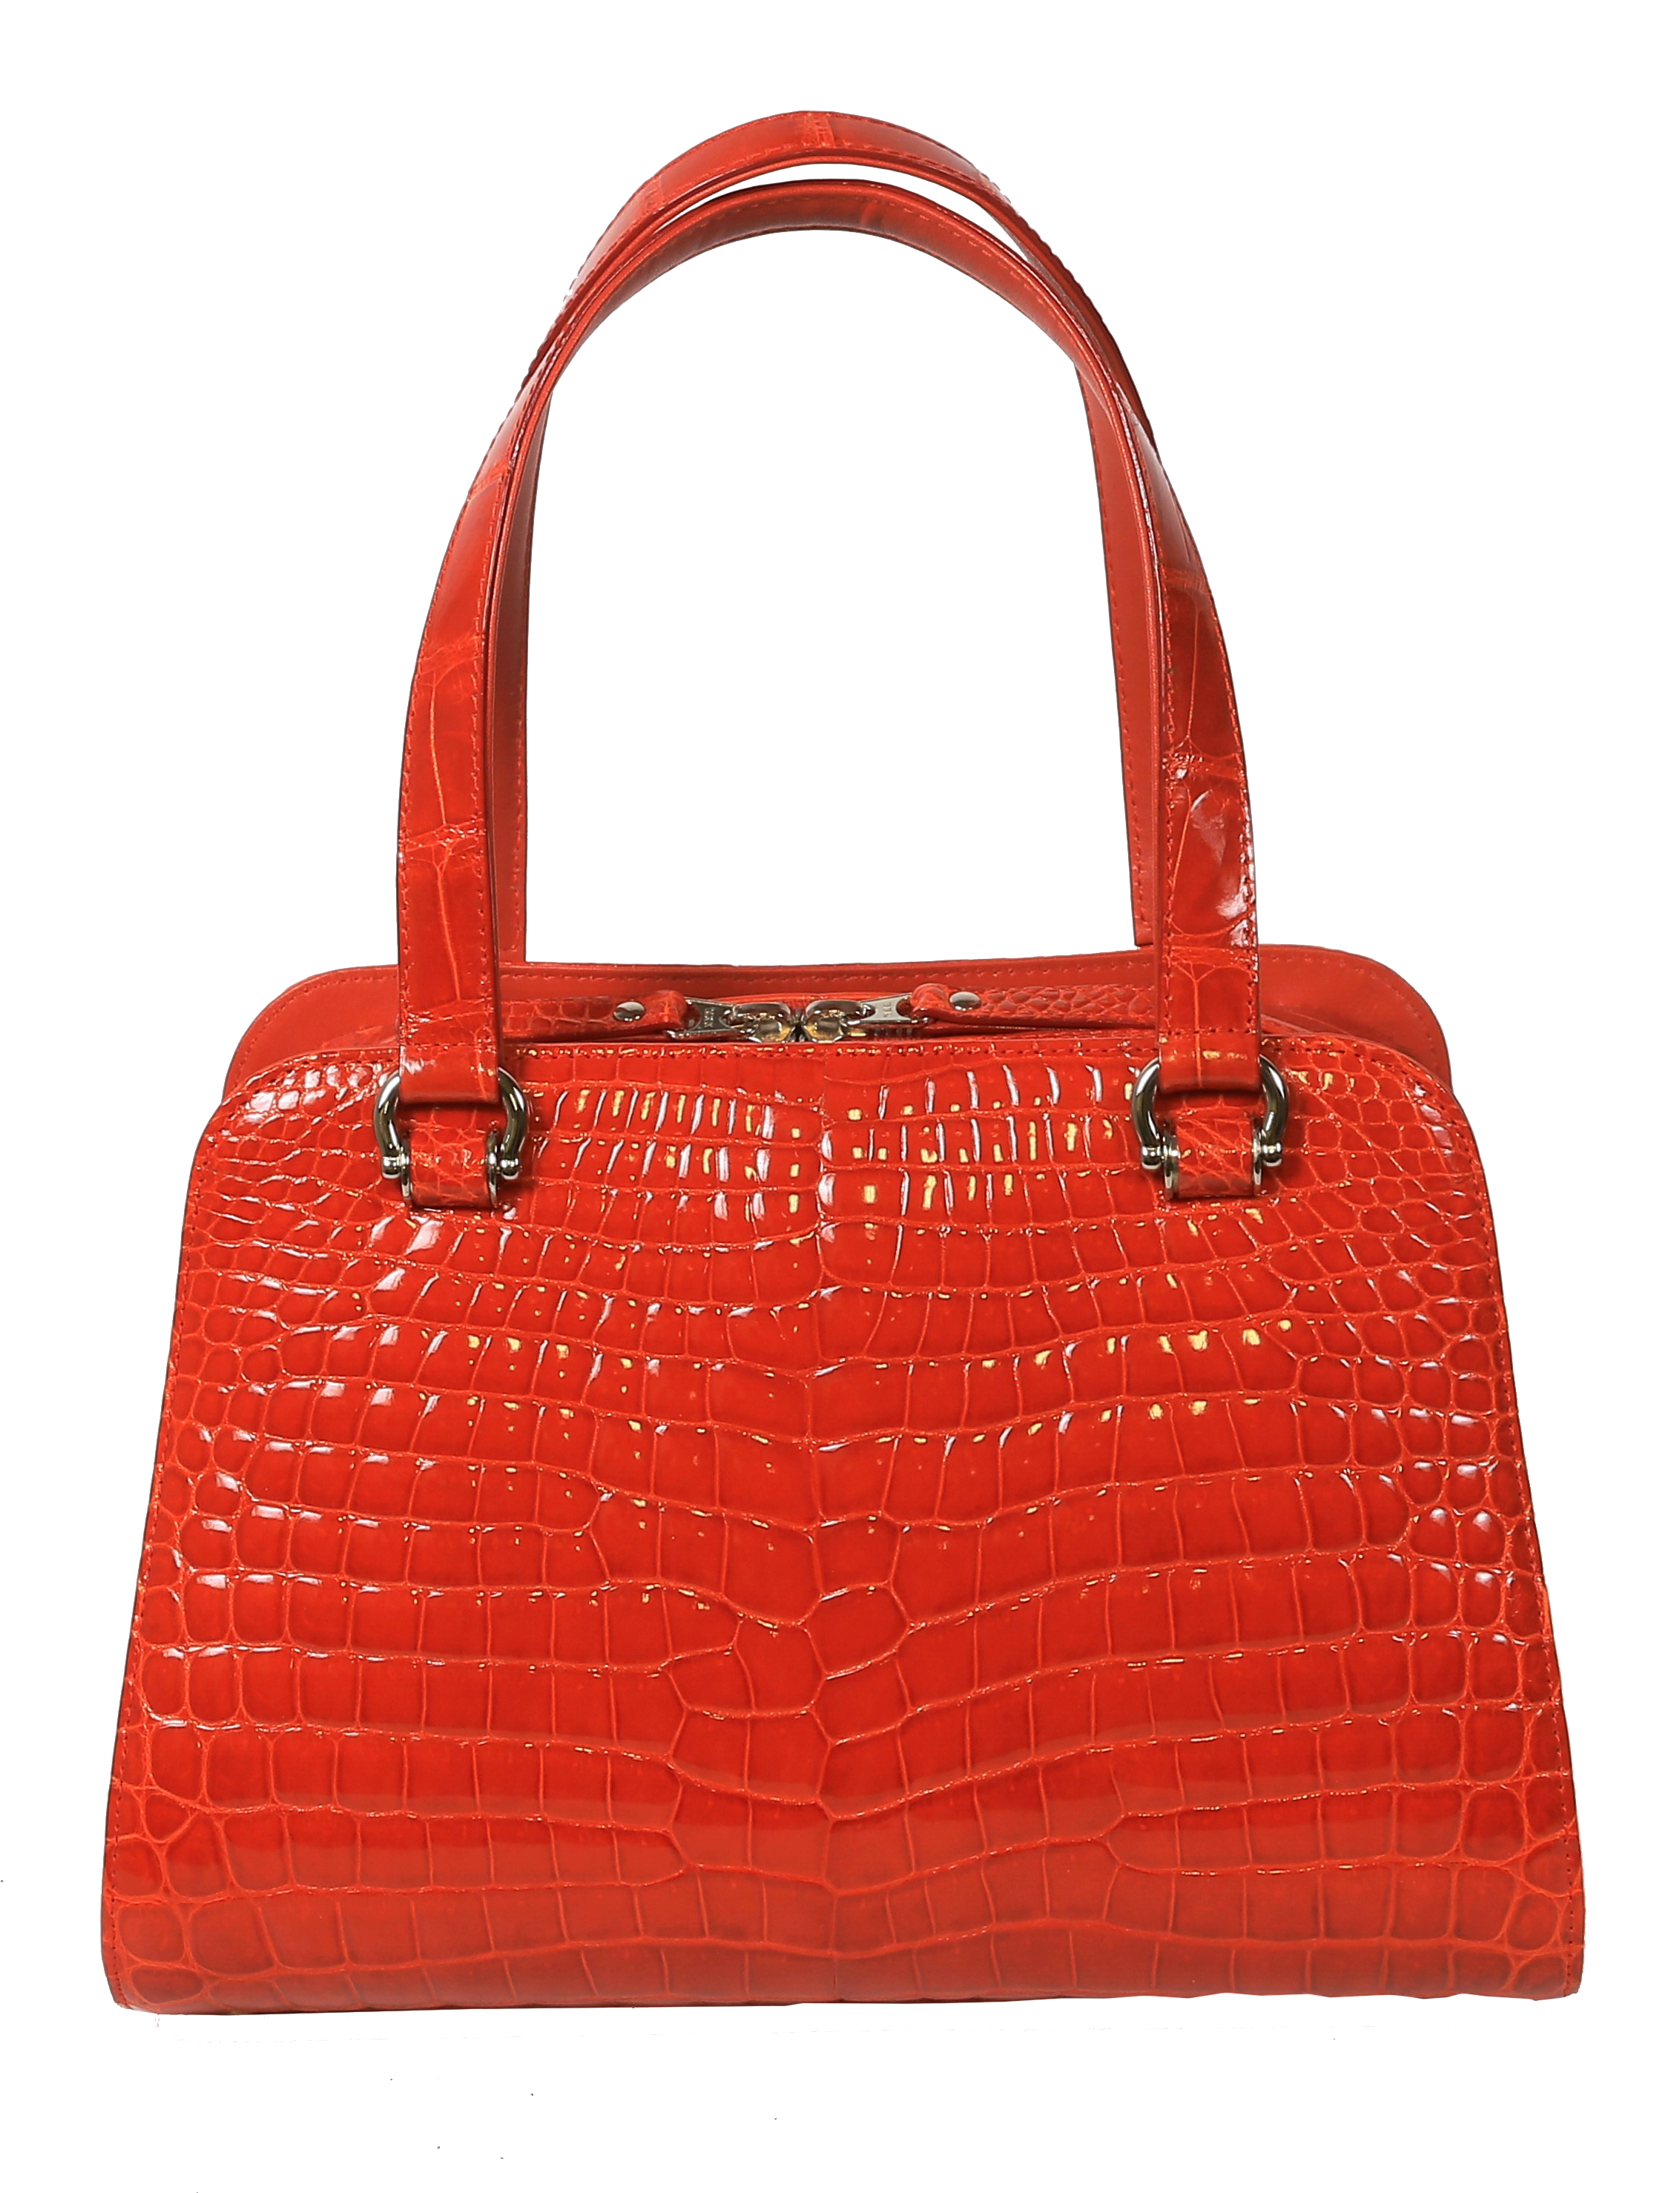 Heather Handbag with Alligator Croc Pattern Embossed Buy Online at Best  Prices on Promise Bags